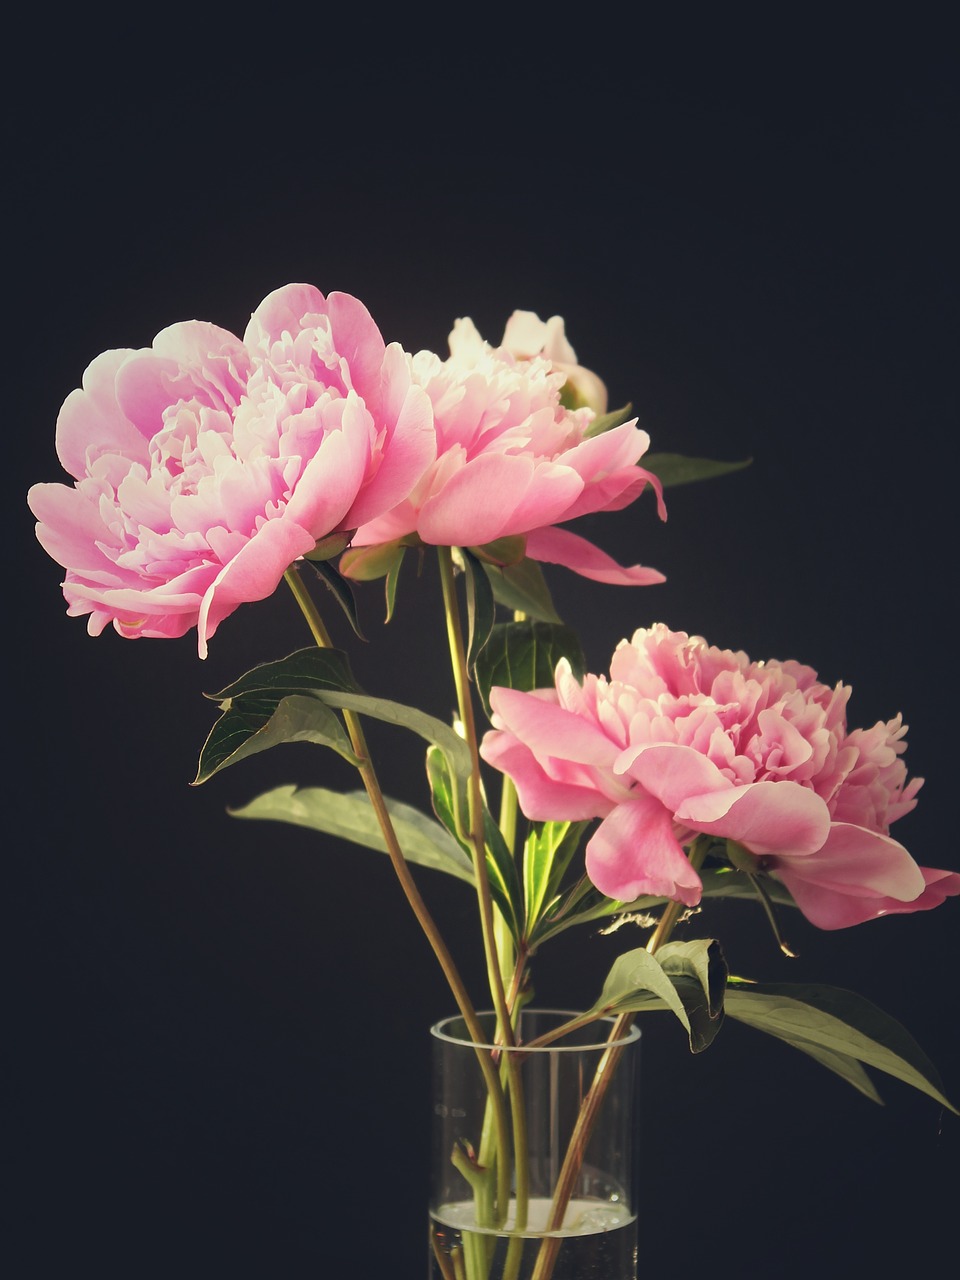 Download free photo of Peony, peony bouquet, flowers, black background ...